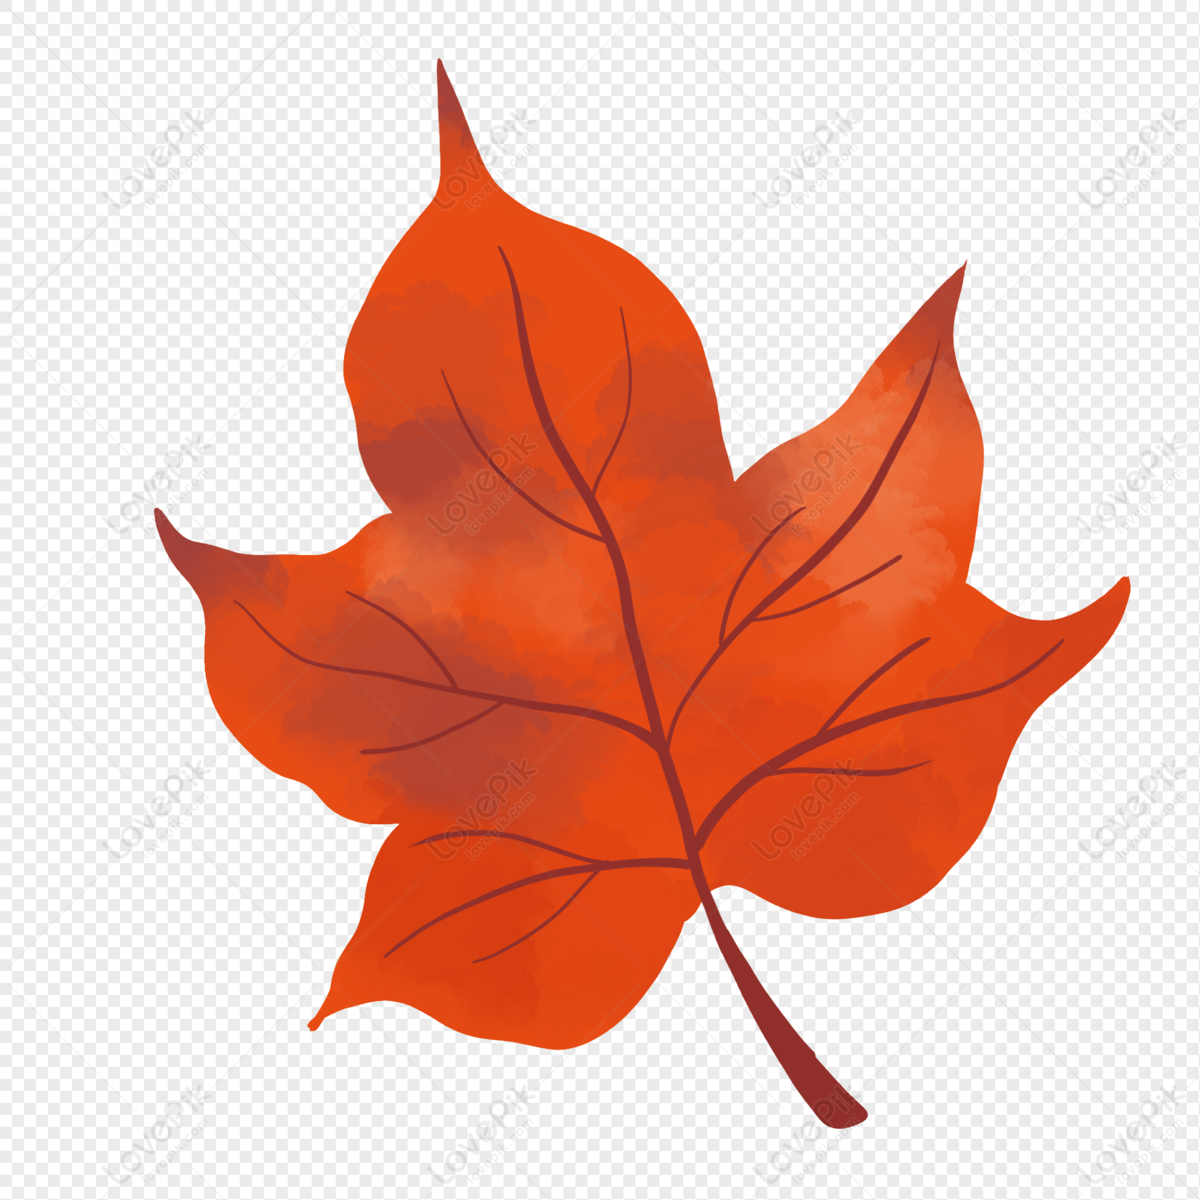 Red Maple Leaf Clipart Hd PNG, Cartoon Hand Drawn Cute Maple Leaf  Illustration, Maple Leaf Clipart, Maple Leaves, Texture PNG Image For Free  Download